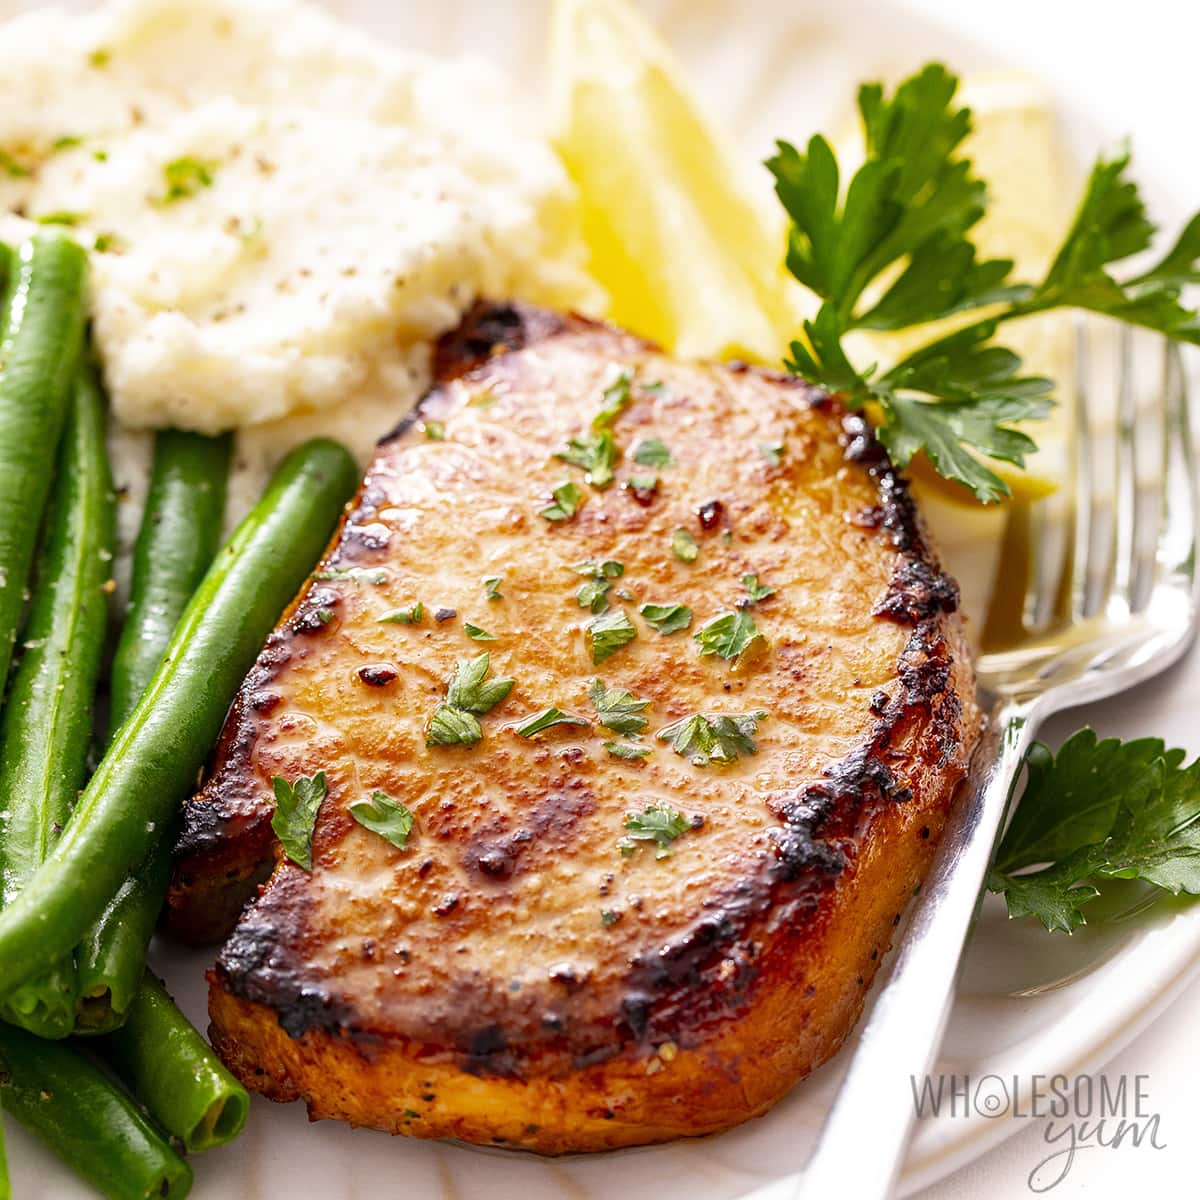 Oven baked pork chops on a plate.